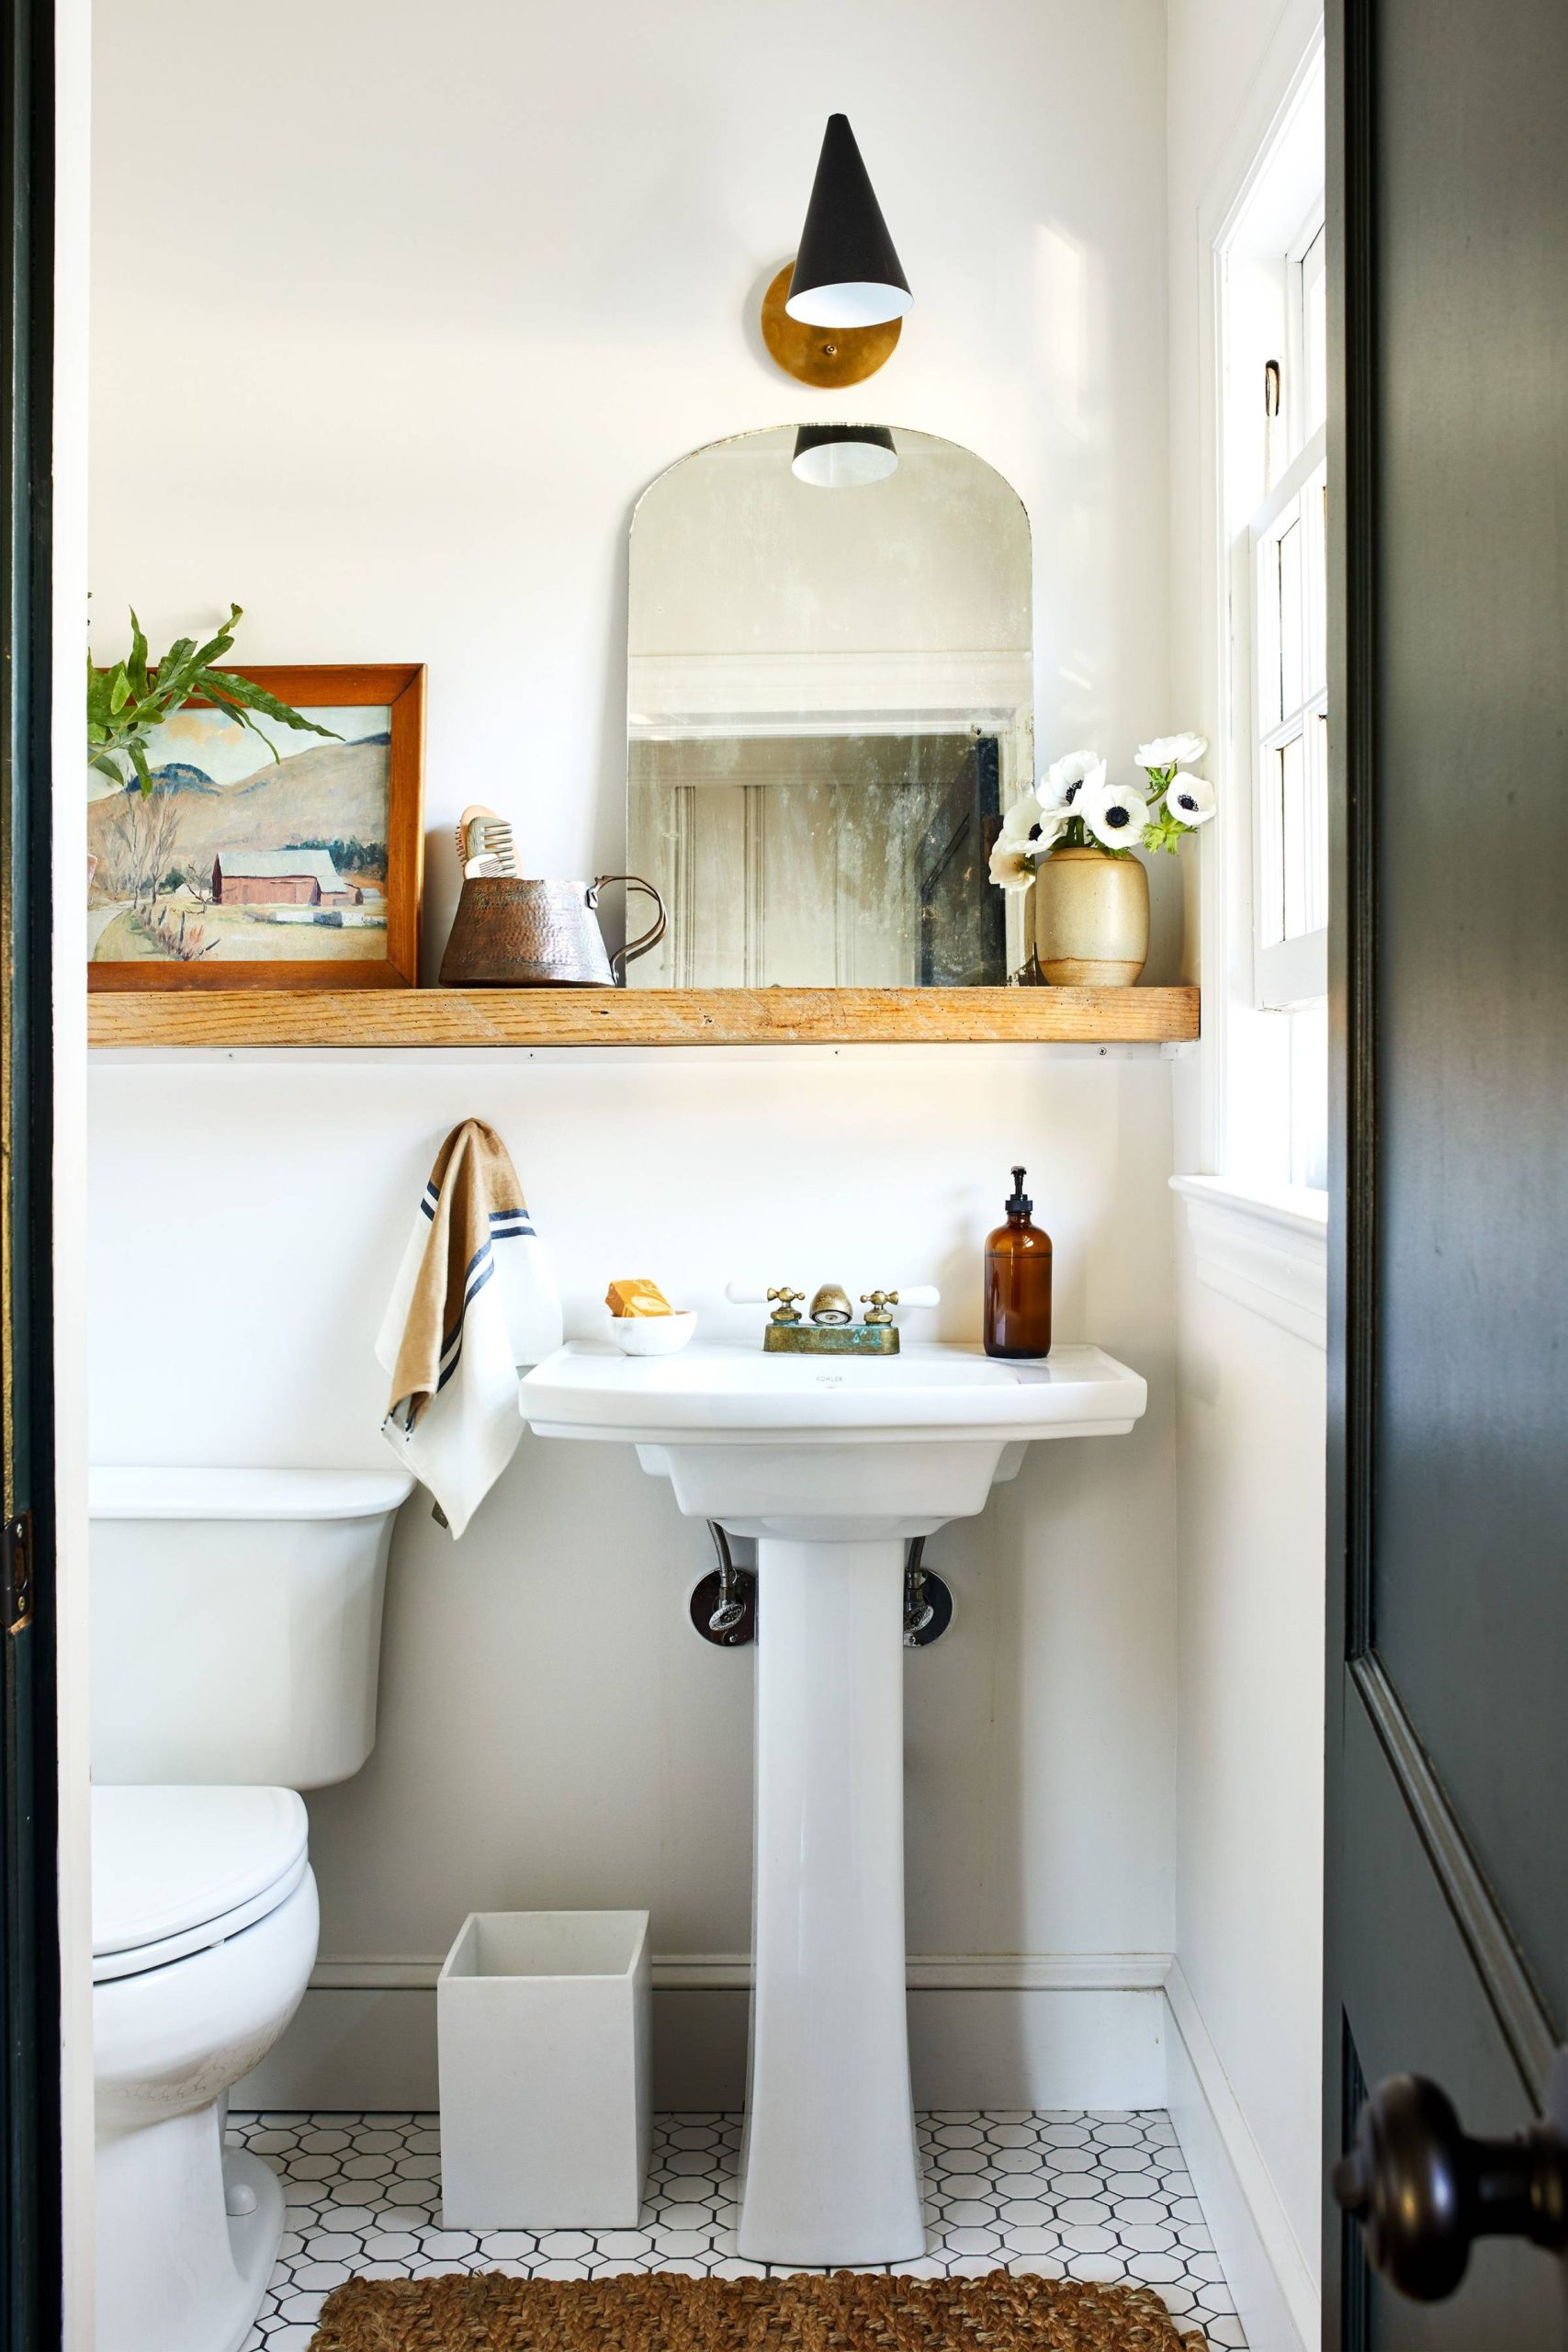 Powder Room Ideas That Pack Style into a Small Space